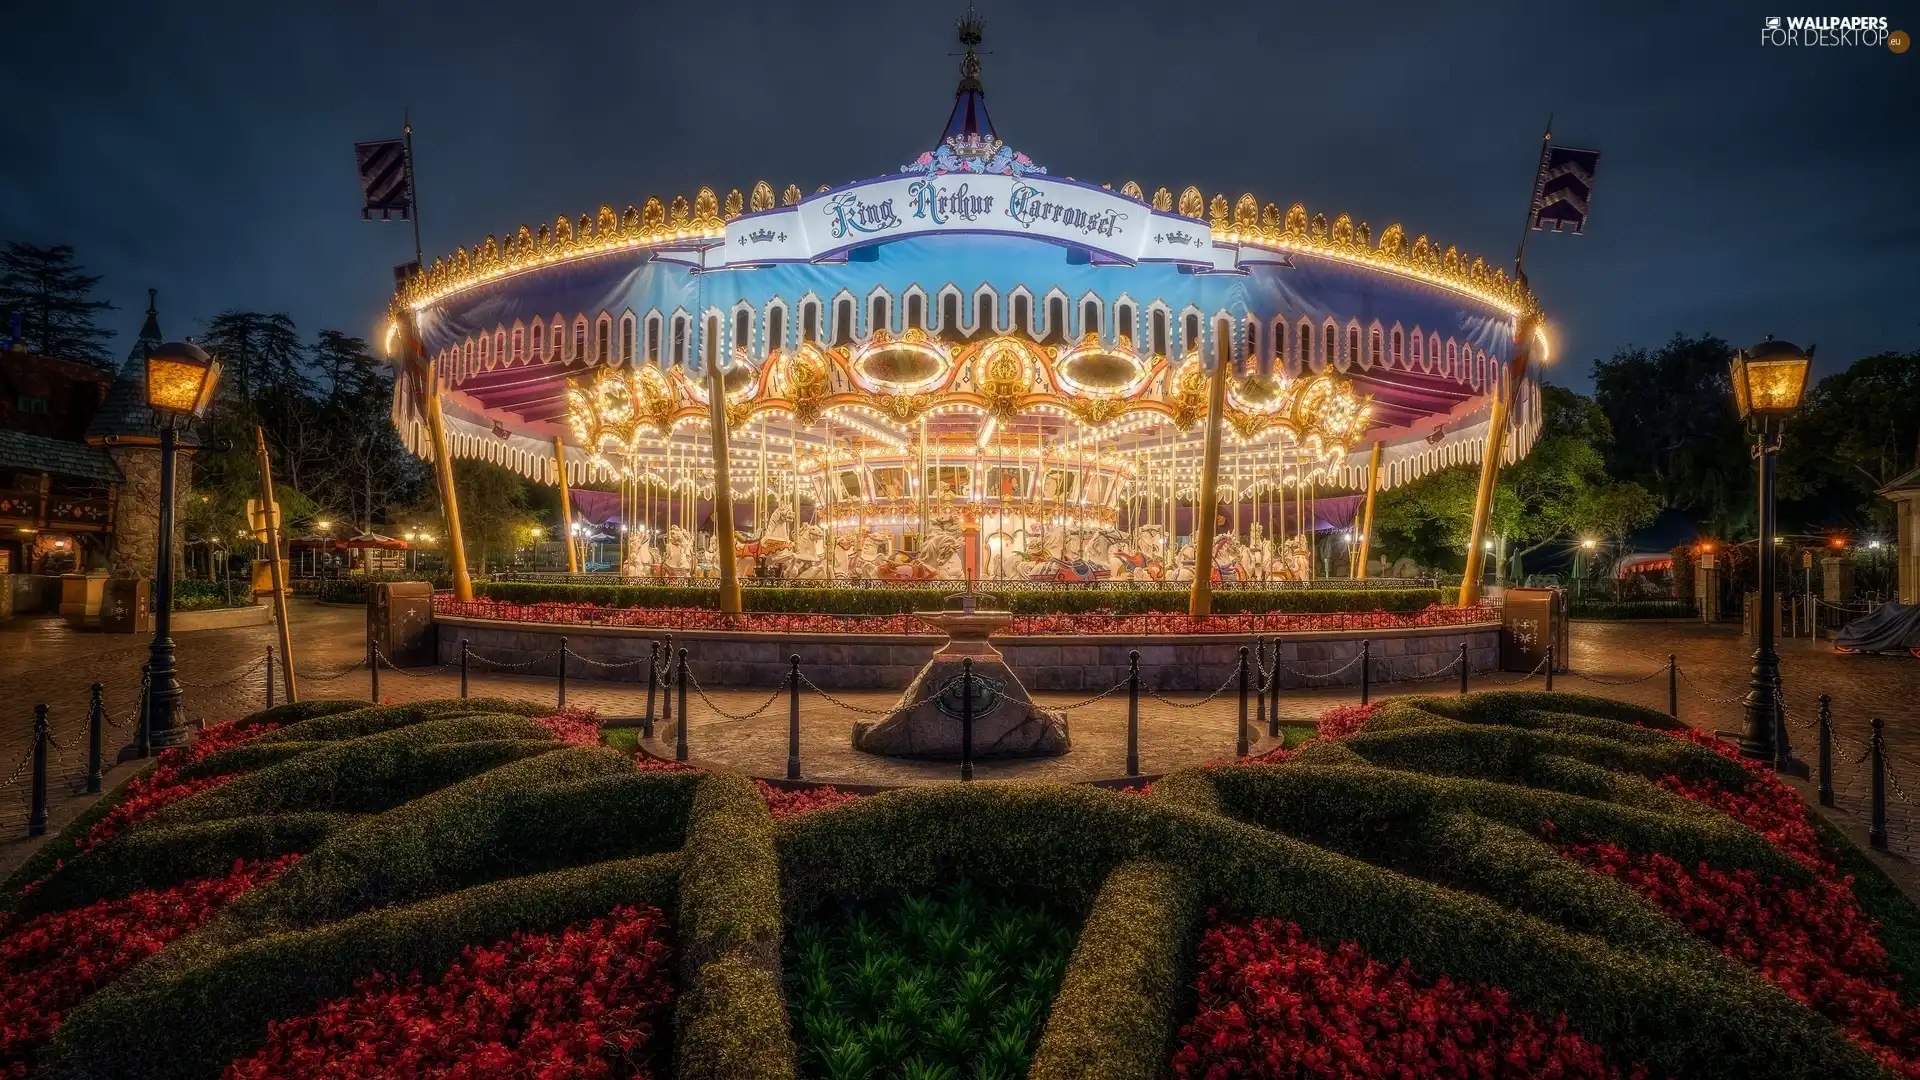 trees, Amusement Park, Flowers, Night, carousel, viewes, Lamps